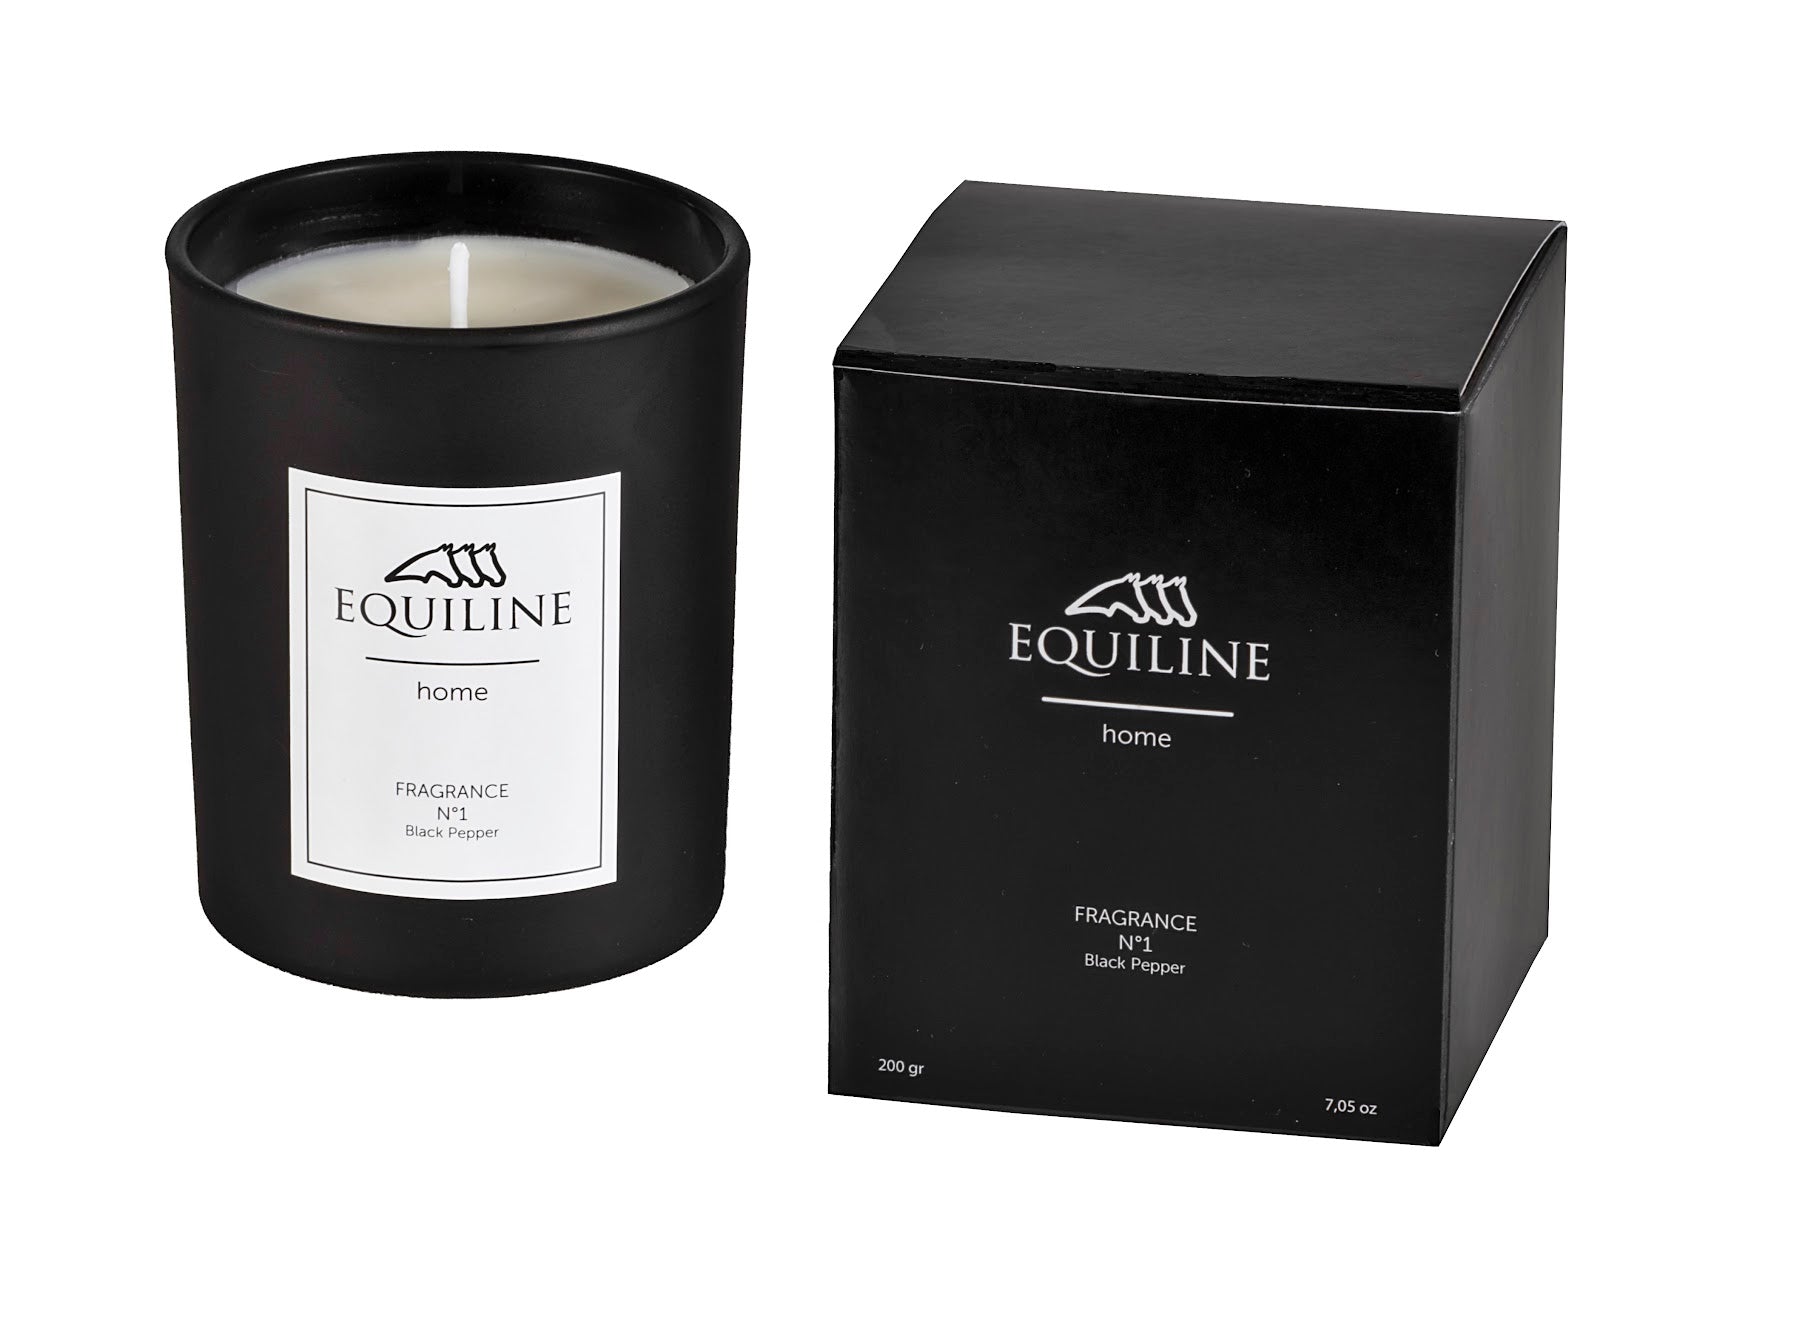 The new Equiline home range offers two stunning scented candles.   Fragrance No.1 is Black pepper, set in a beautiful matt black glass casing and finished with the Equiline logo on white.